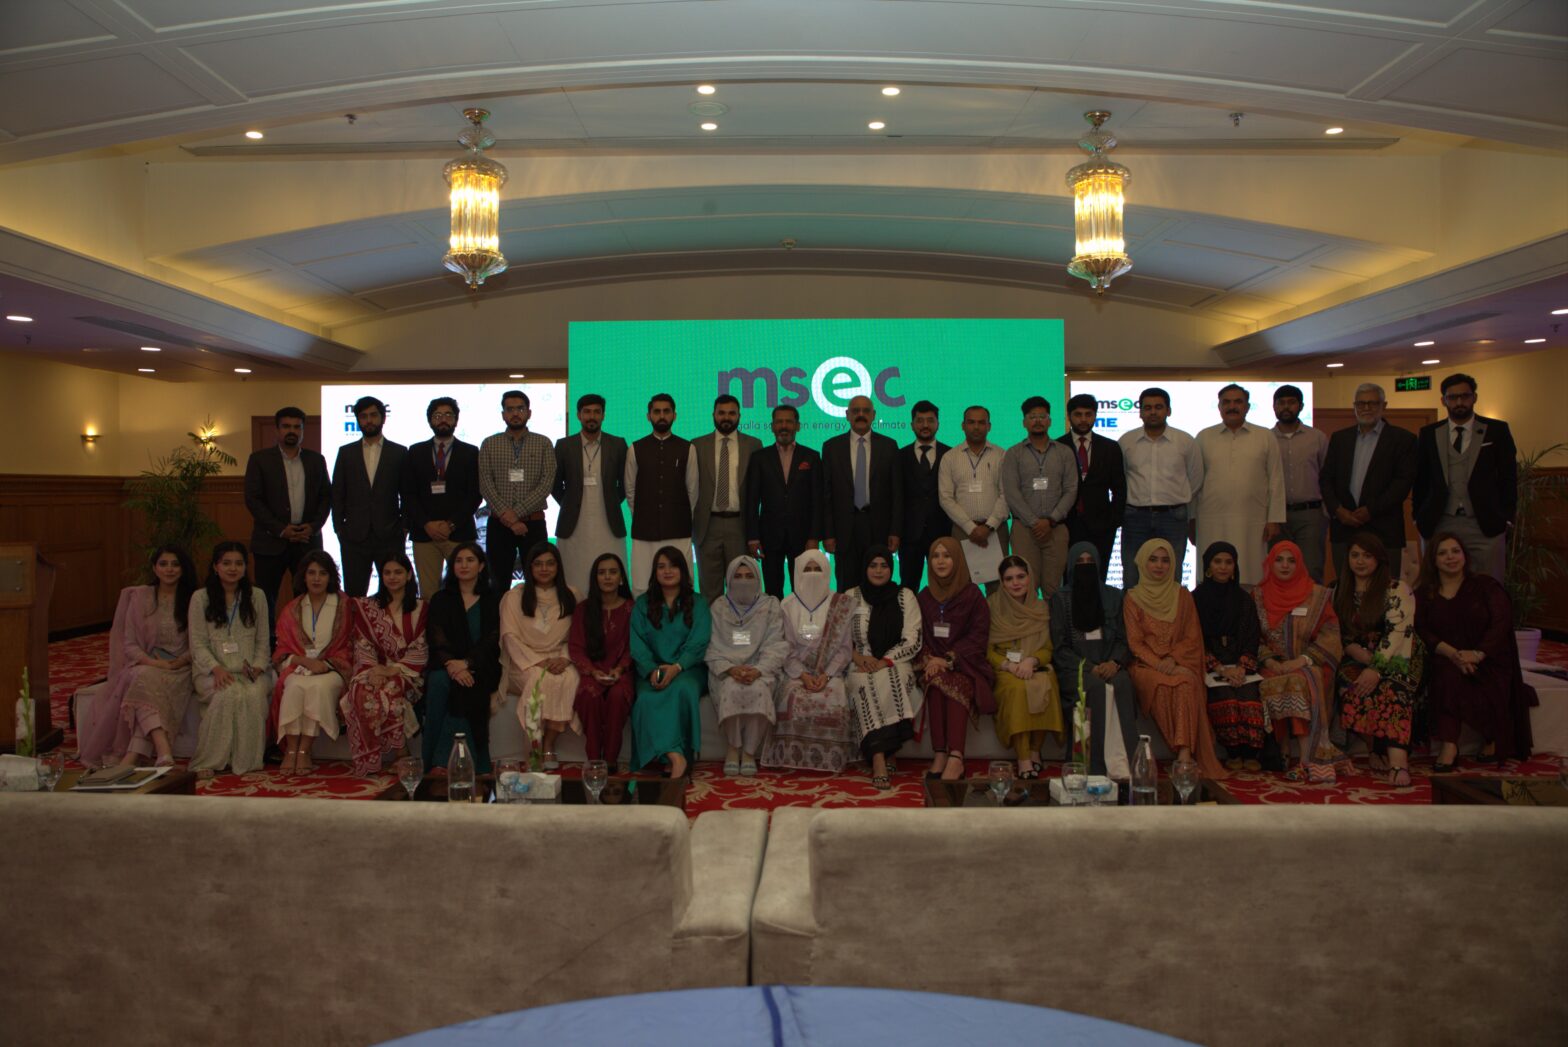 Renewables First launches first batch of MSEC graduates to fill knowledge gap in Energy sector